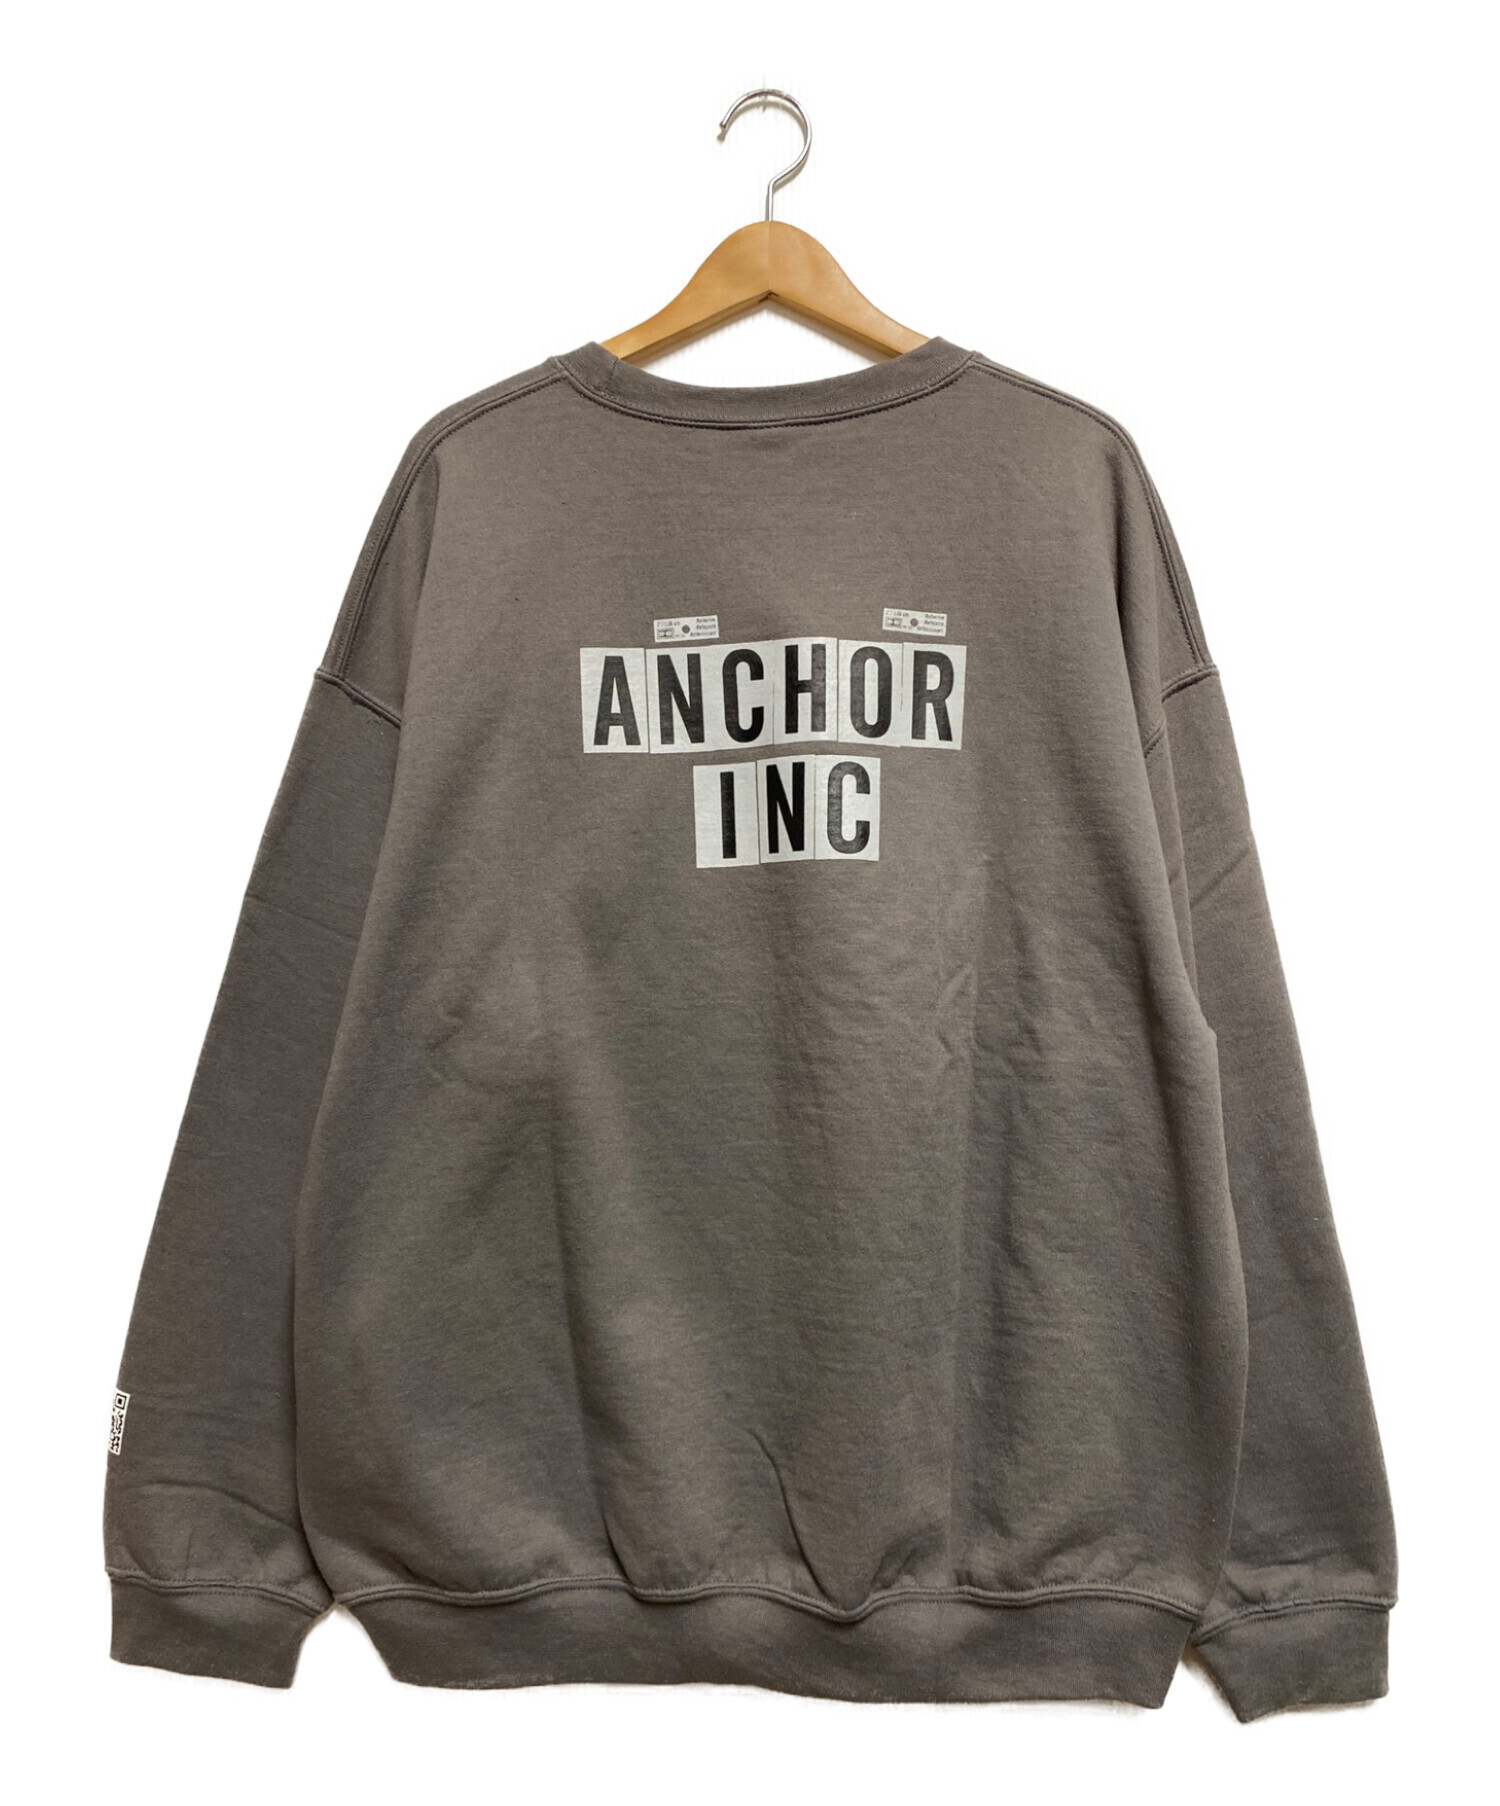 Anchor Inc. Reflective Letter Sweat